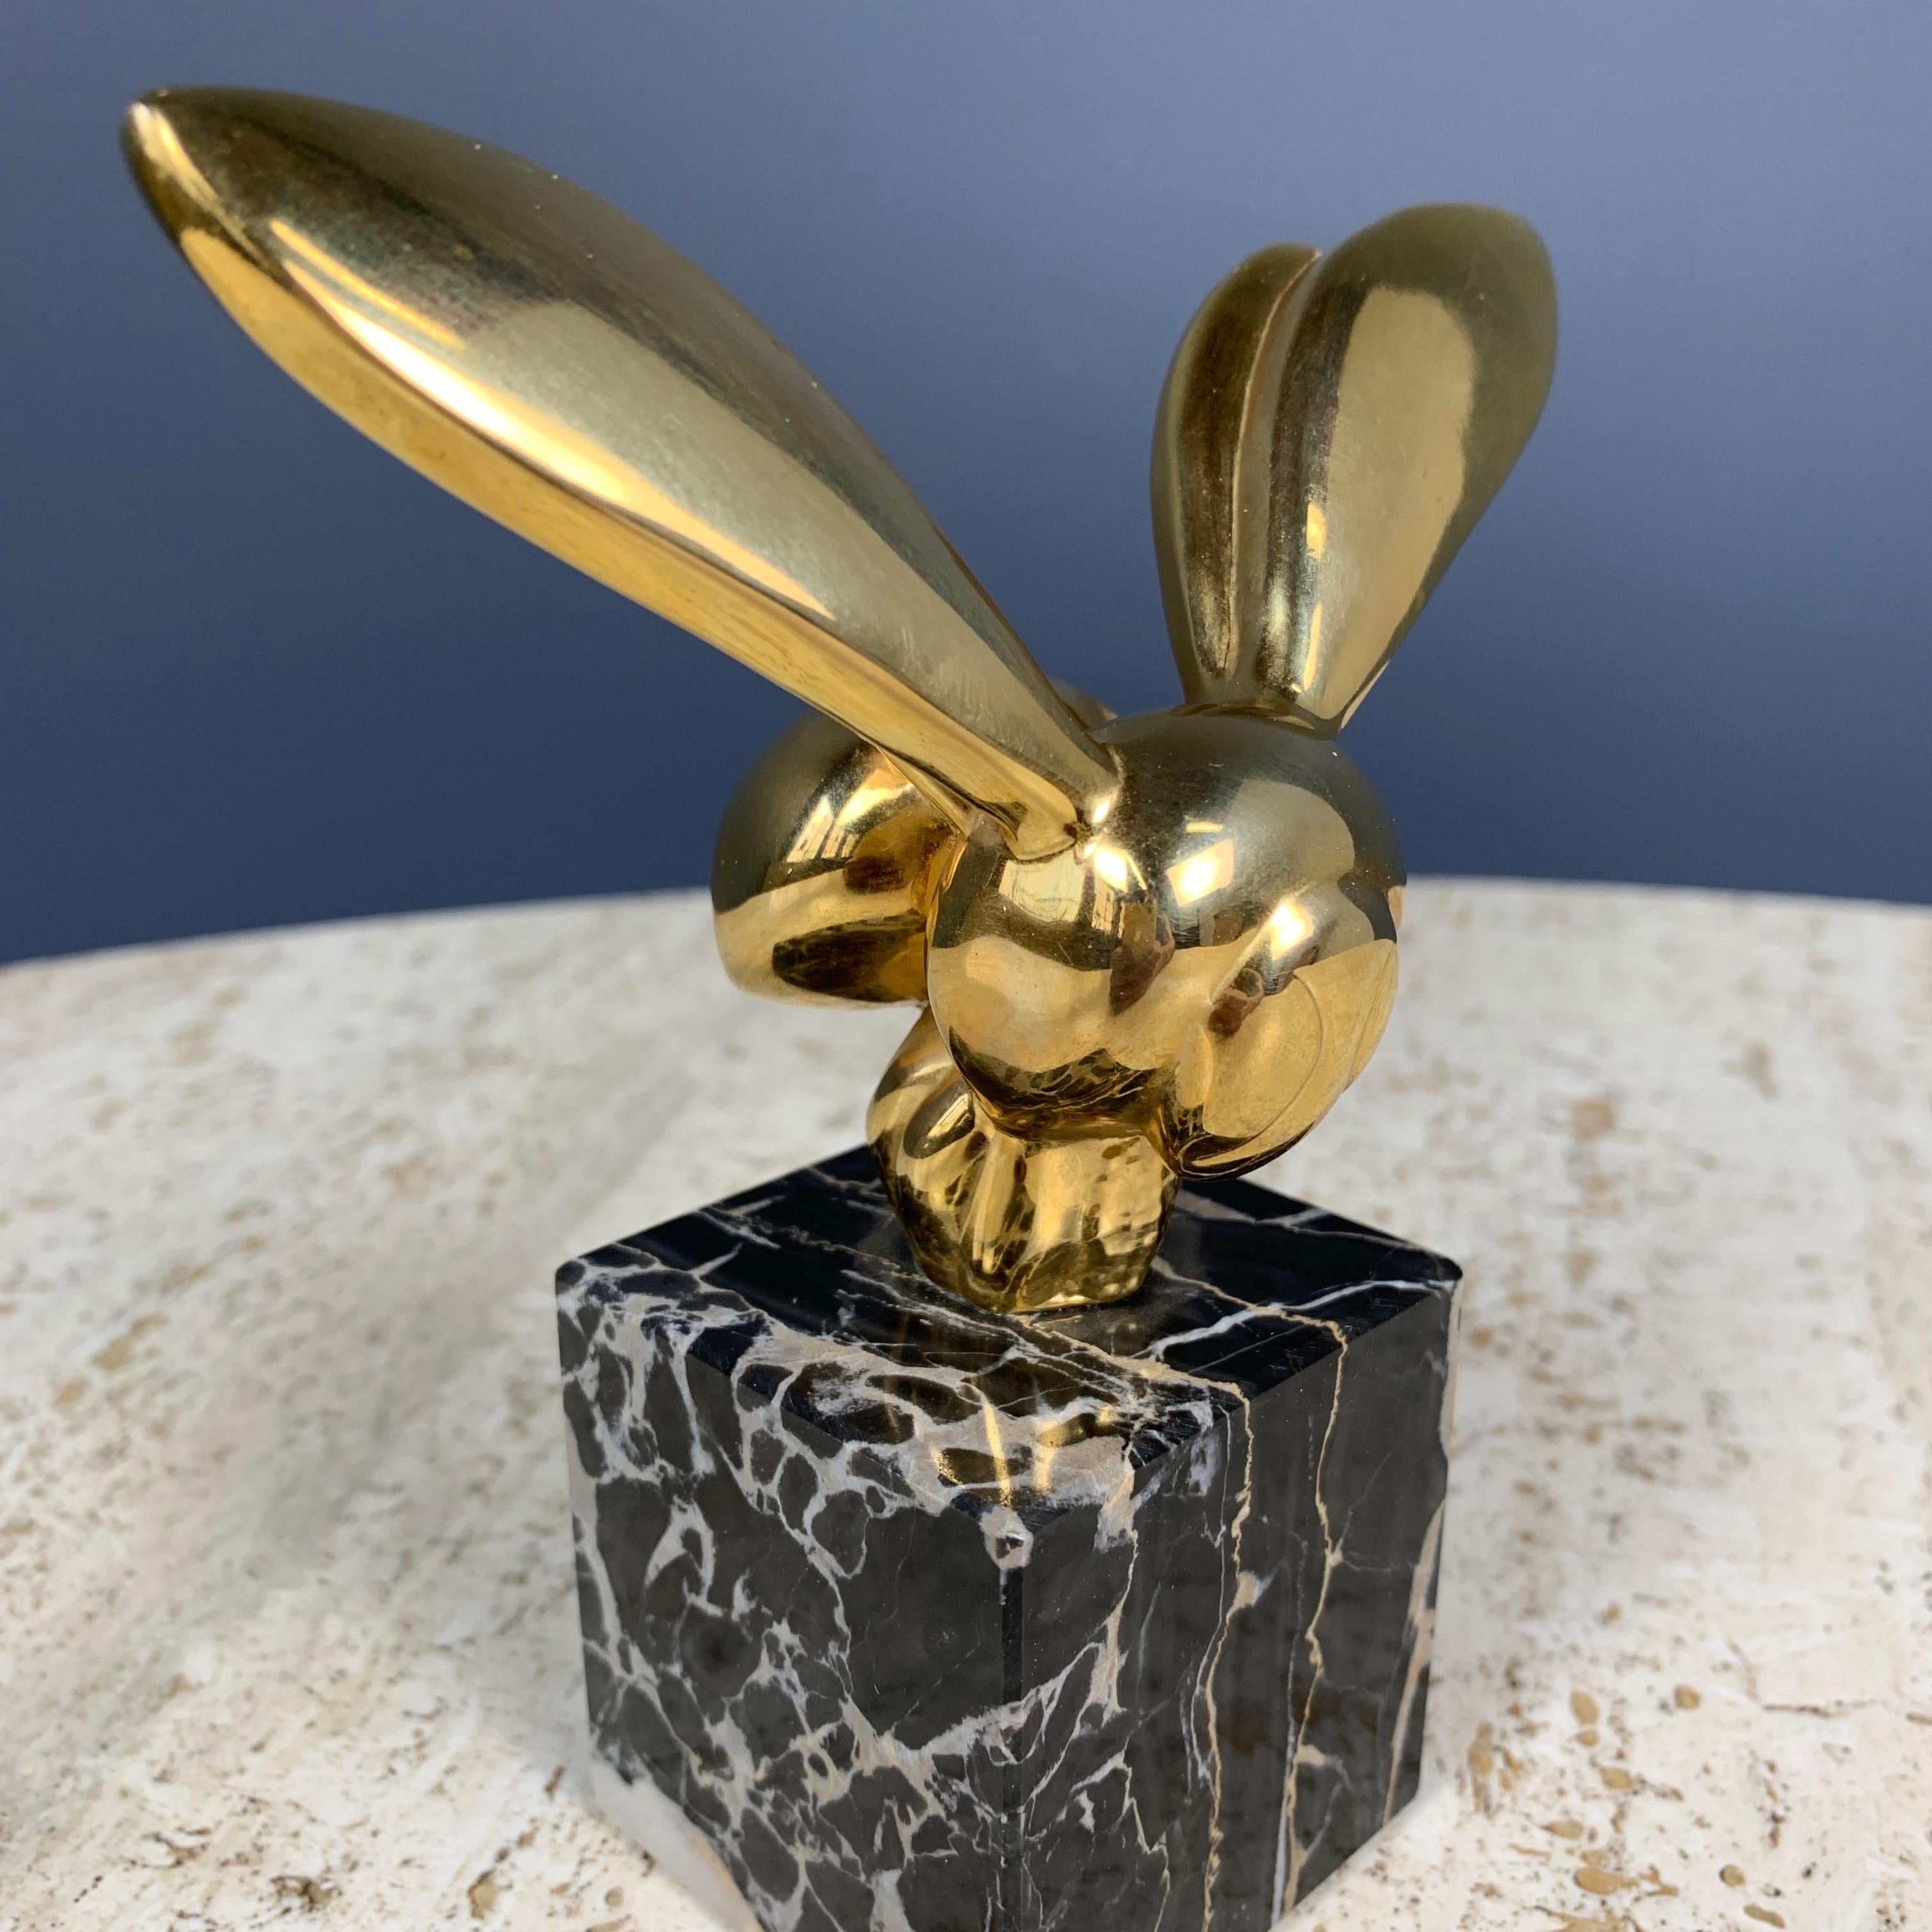 Modern Brass Bee Sculpture on Marble Base by G. Lachaise for the Philadelphia MOA